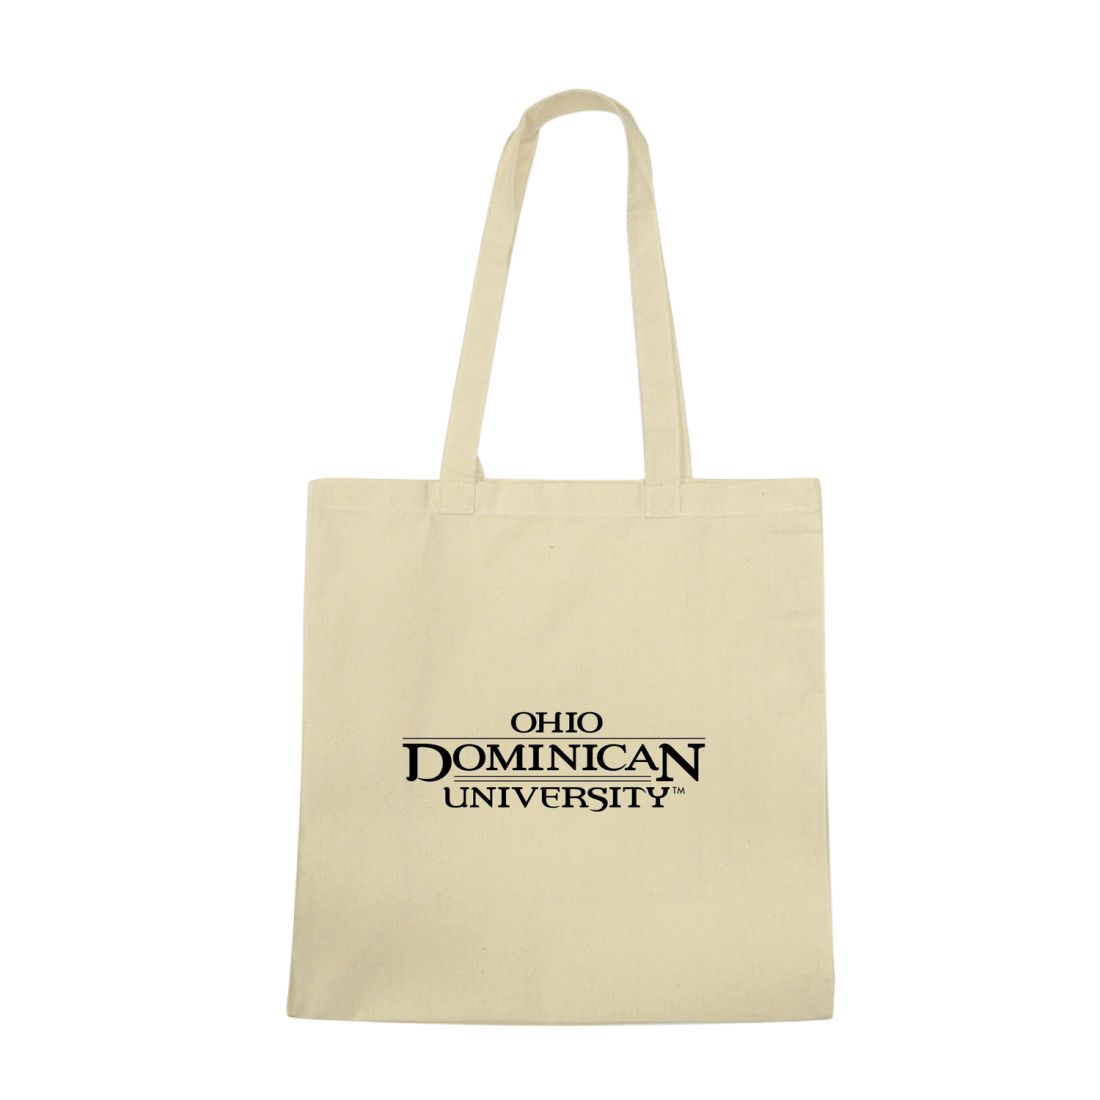 Ohio Dominican University Panthers Institutional Tote Bag